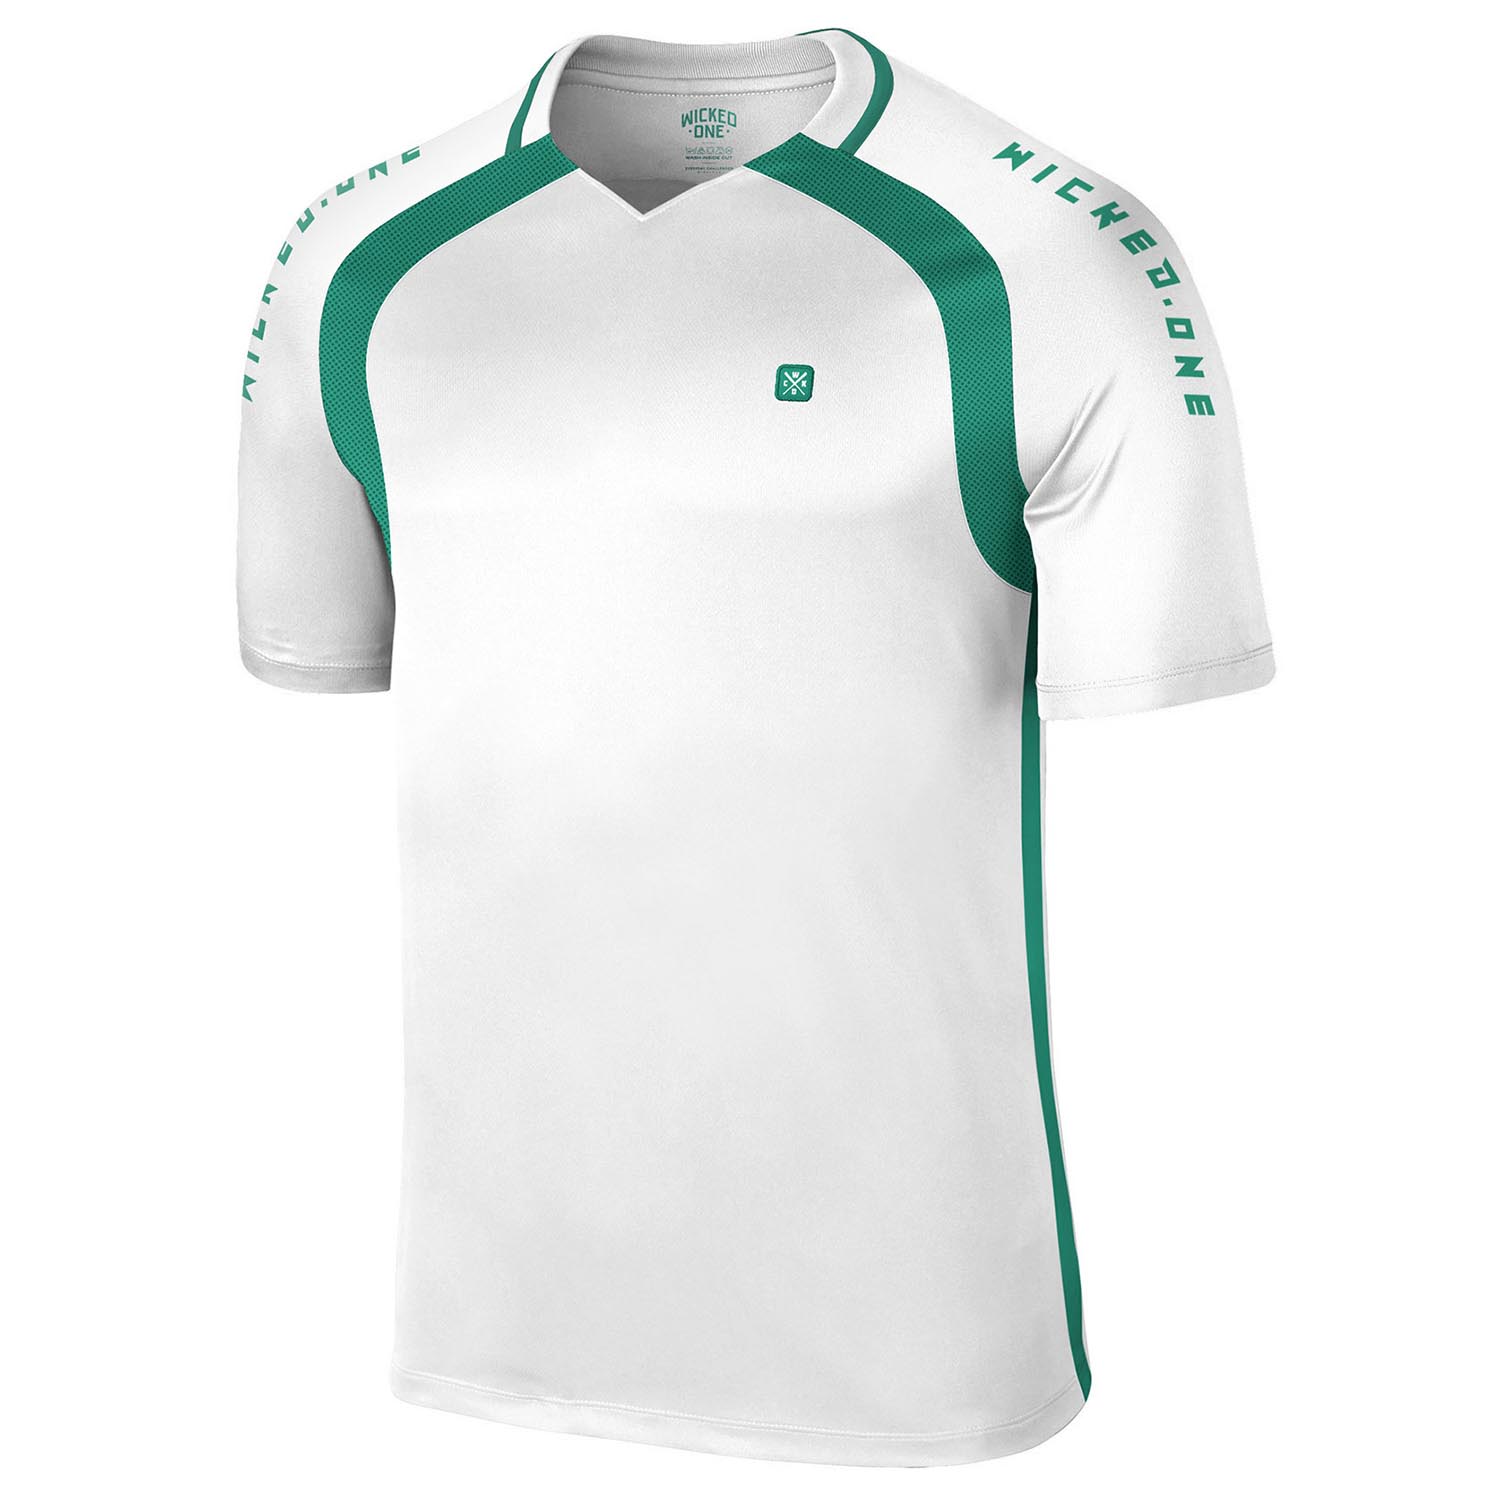 Wicked One Performance T-Shirt, Prime, white-green